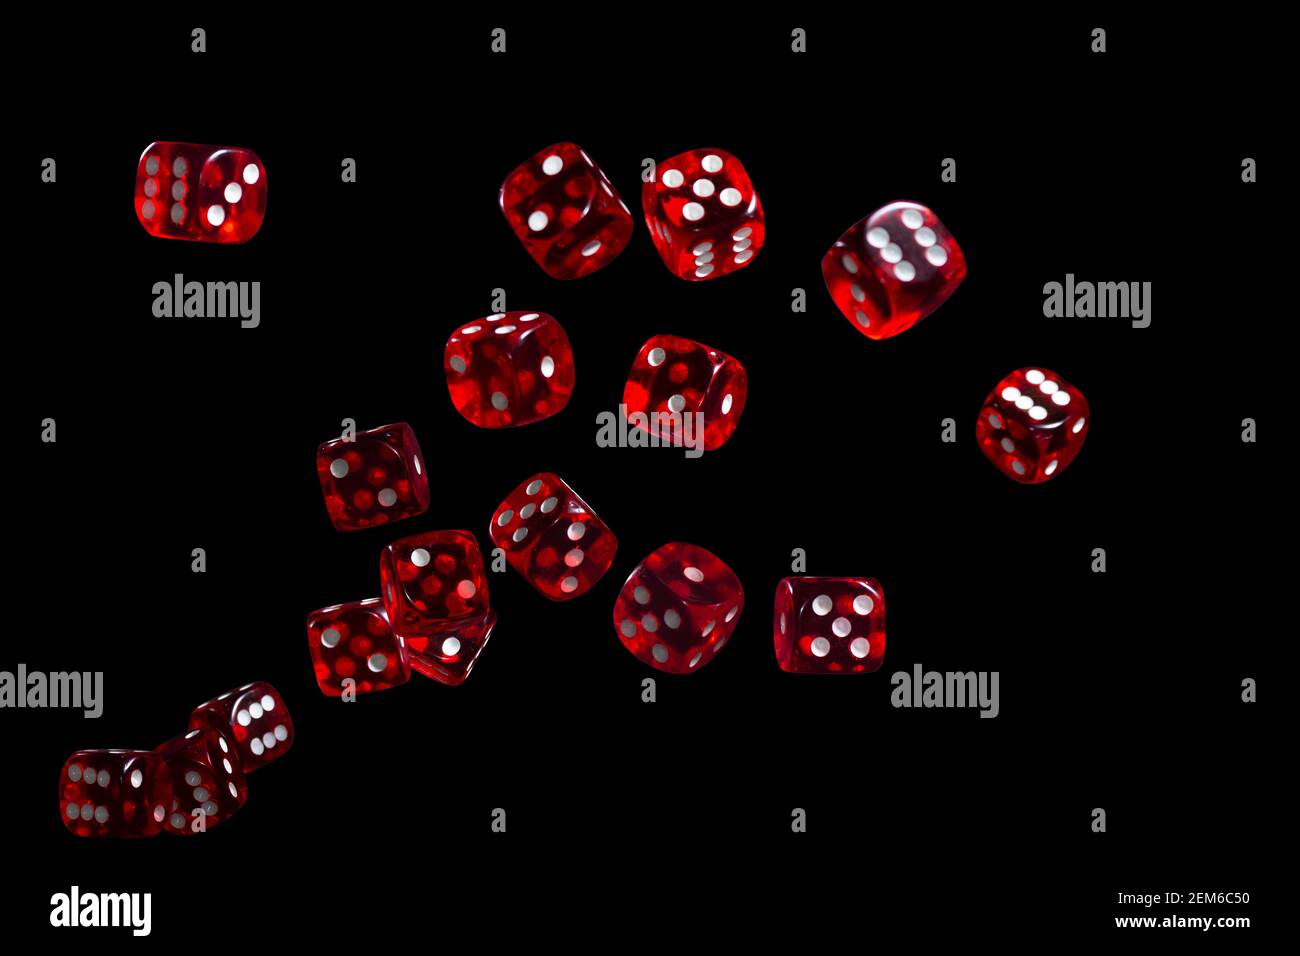 Many red dice flying on black background. Gambling concept. Stock Photo